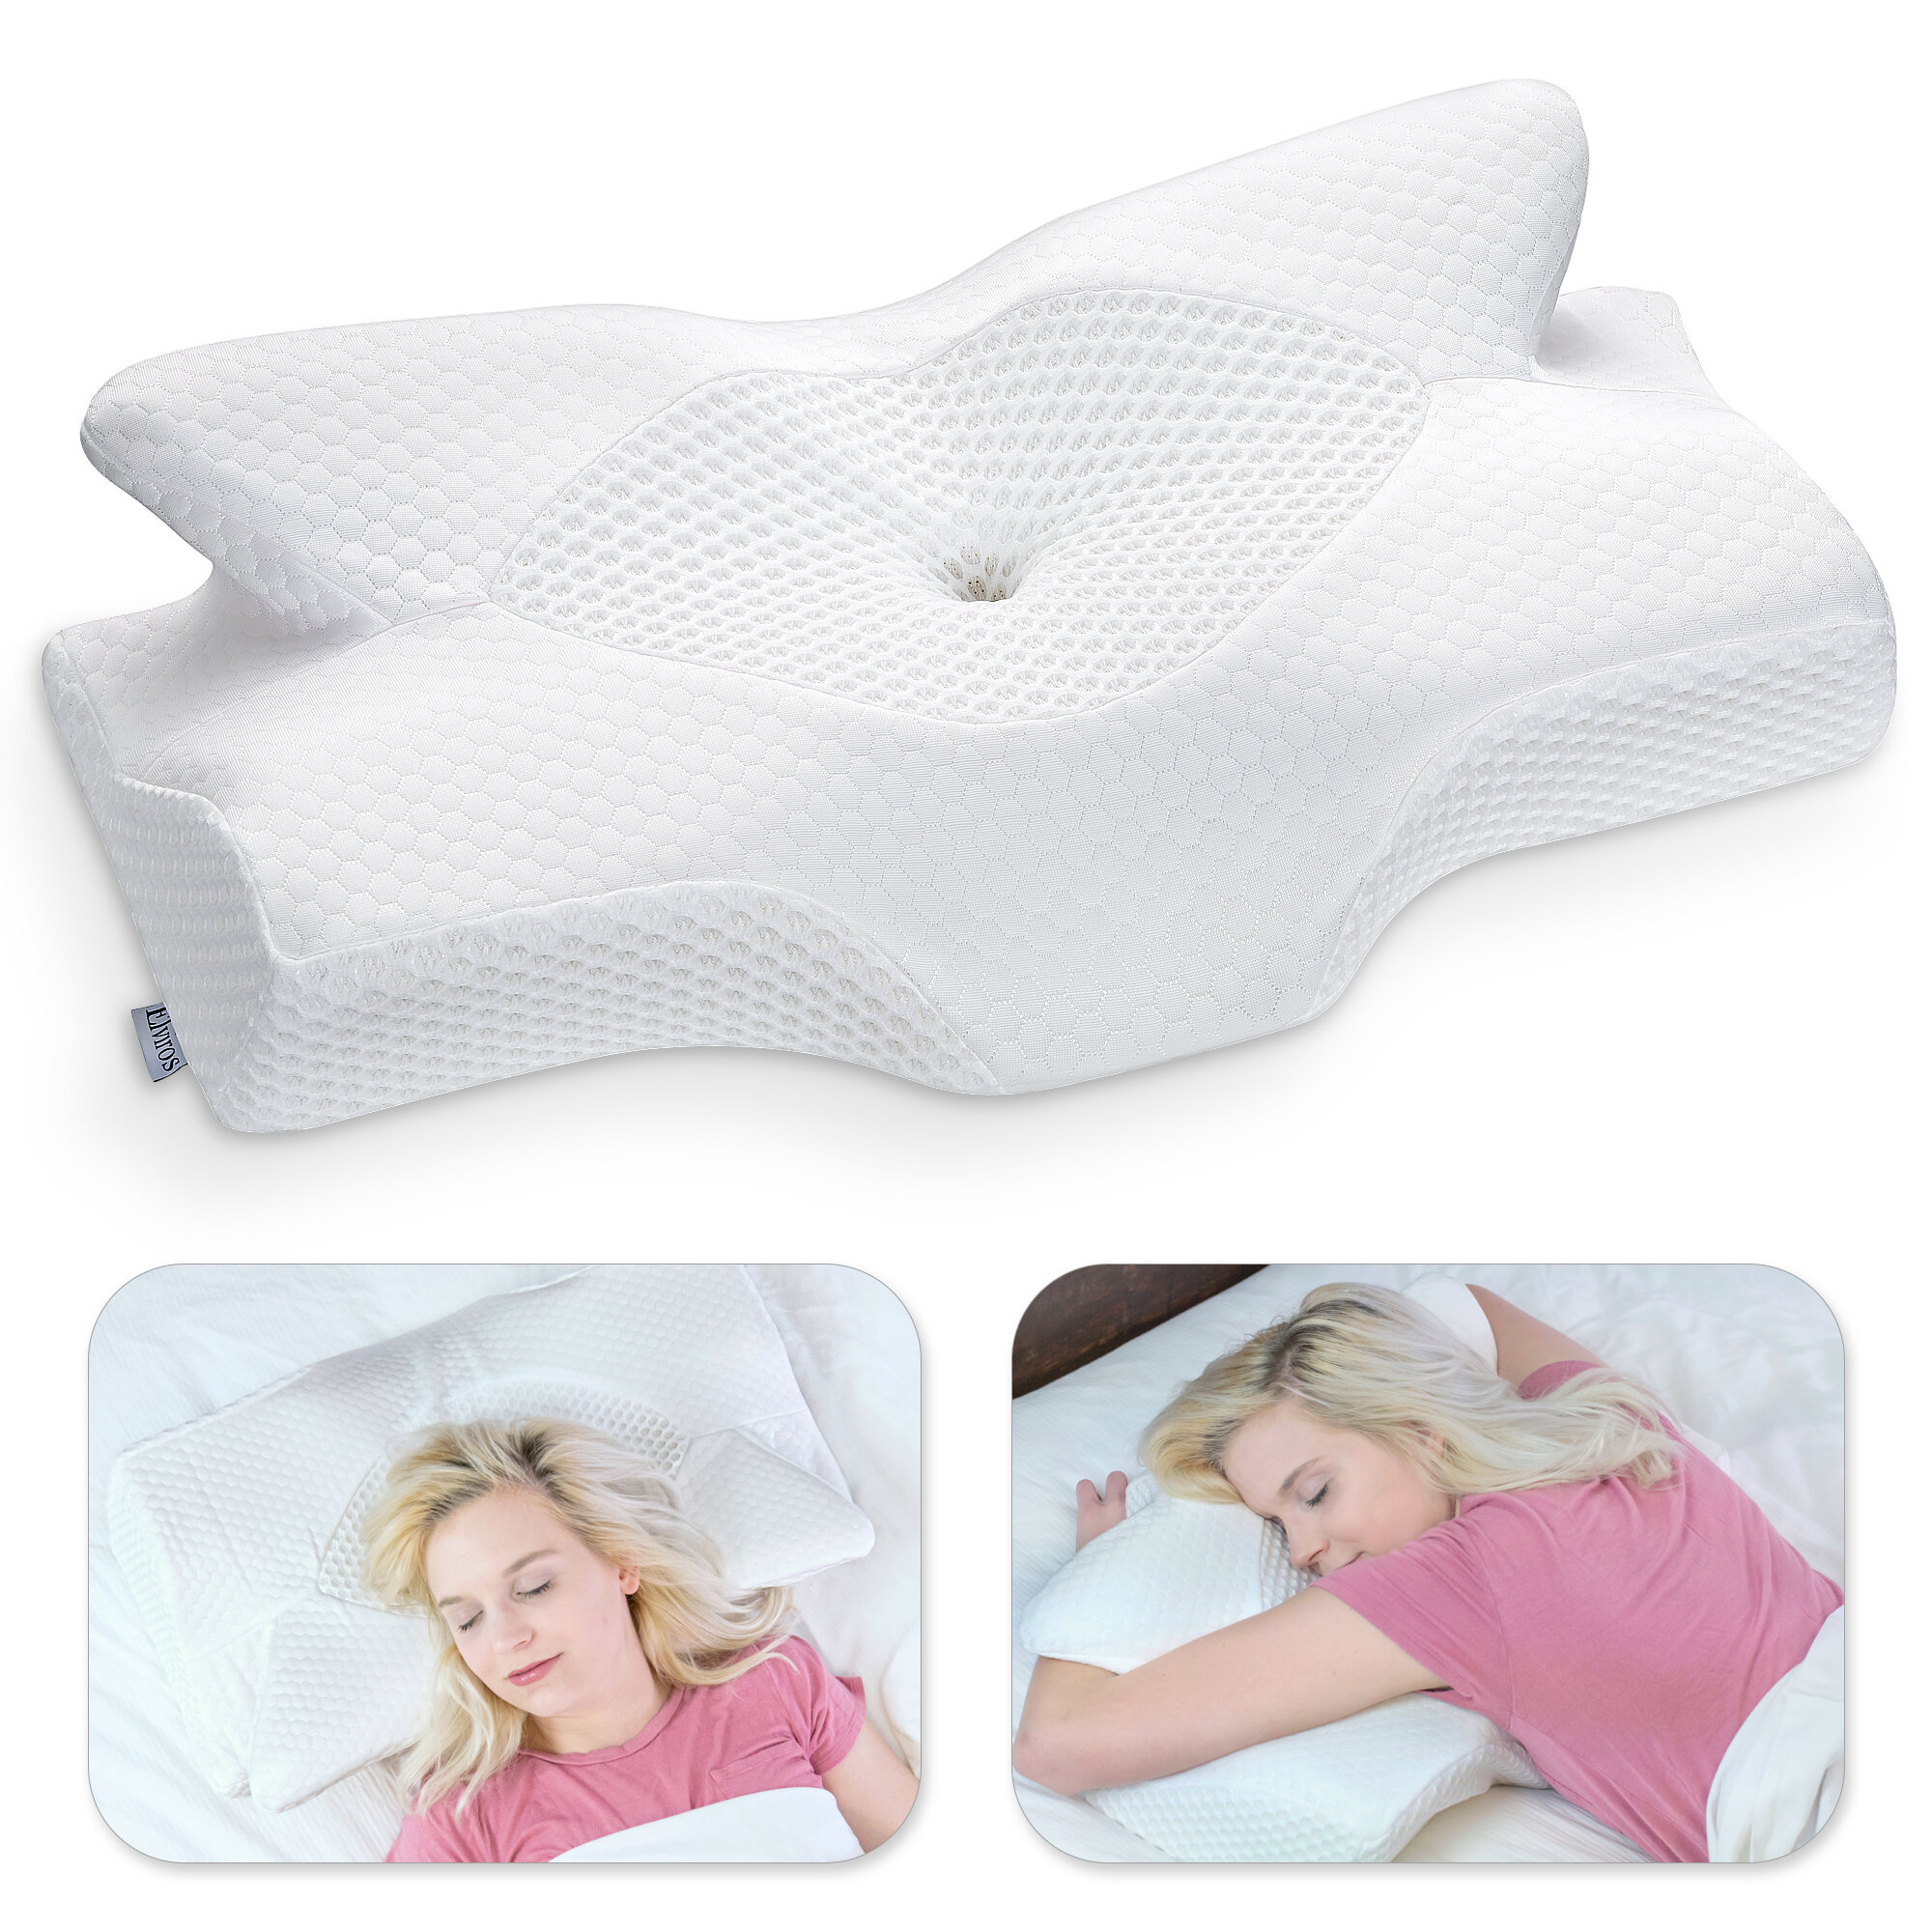 Professional Contour Memory Foam Pillow Orthopedic Firm Neck Head Back Support